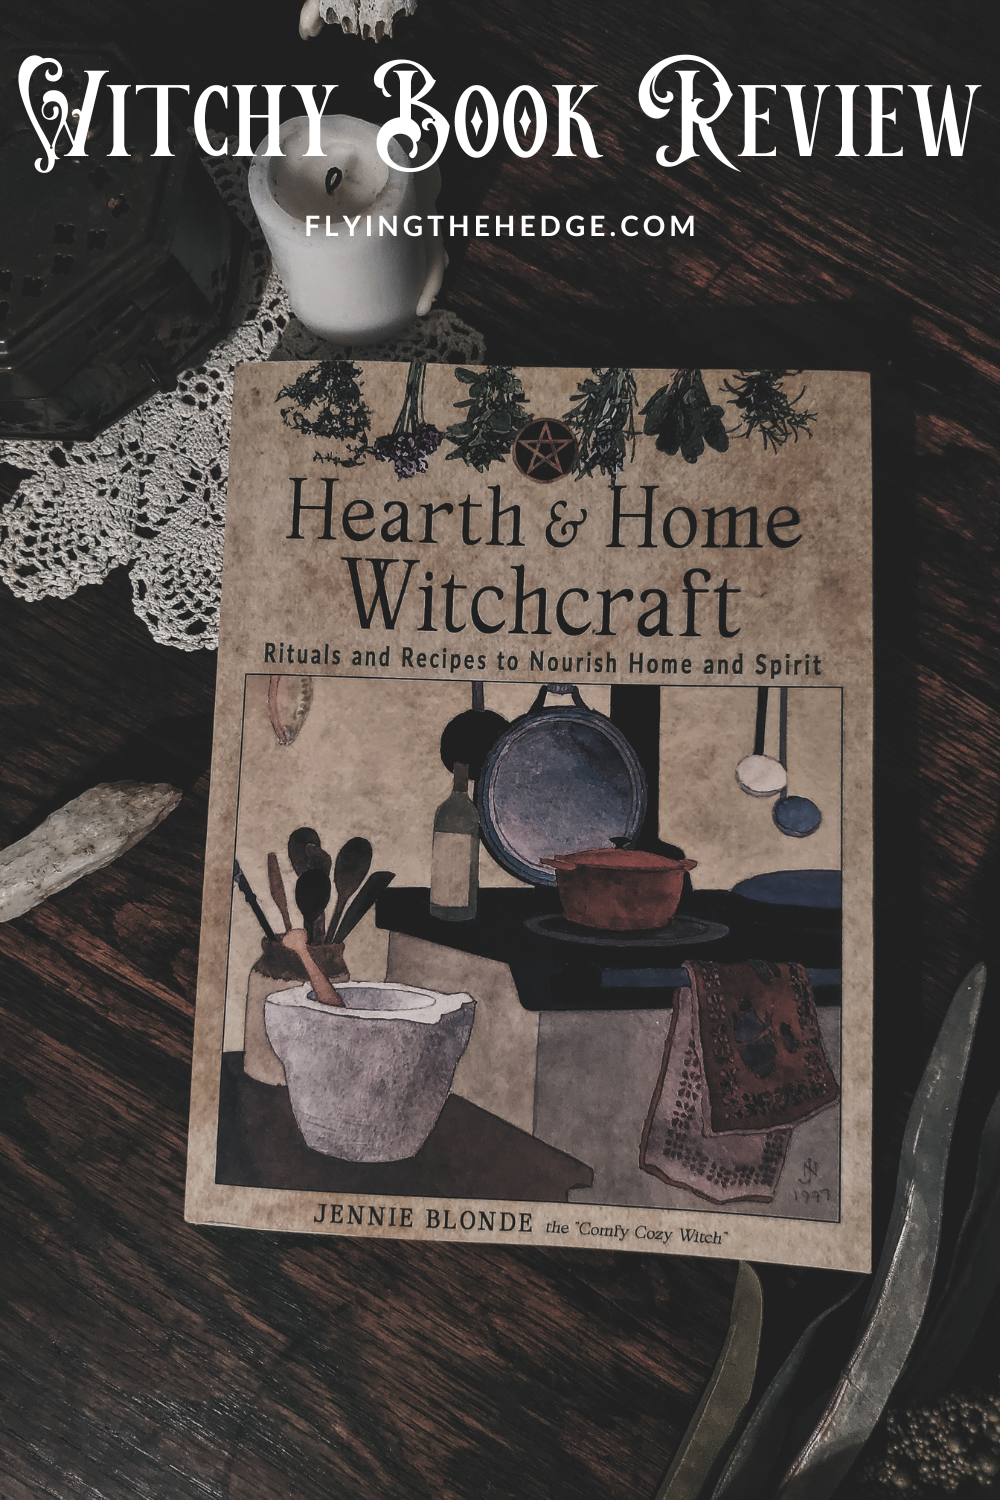 cozy witchcraft, comfy witchcraft, witchcraft, pagan, neopagan, occult, book review, witchy, witch, witchy book